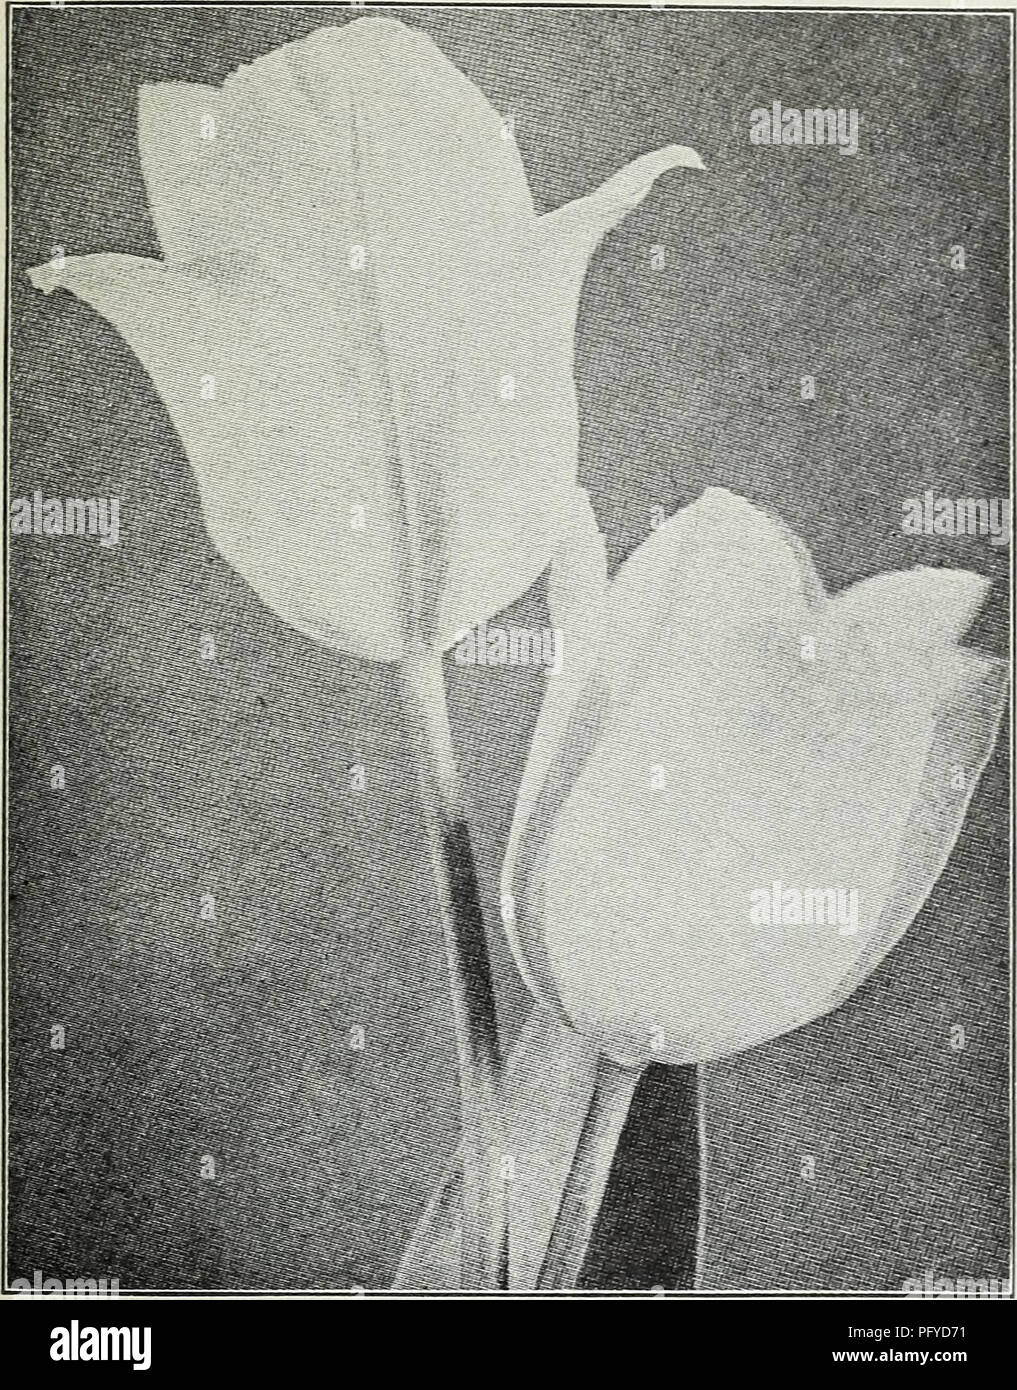 . Currie's autumn 1929 54th year bulbs and plants. Flowers Seeds Catalogs; Bulbs (Plants) Seeds Catalogs; Nurseries (Horticulture) Catalogs; Plants, Ornamental Catalogs. Currie's Seed Store, Milwaukee, Wisconsin. EARLY DOUBLE FLOWERING TULIPS Azalea—(E. 8) Beautiful deep rose flushed salmon. Doz., ^1.25; 100, ^8.50; 1000, ^80.00. Boule de Neige—(E. 10) Large pure white. Doz., 95c; 100, ^6.50; 1000, ^60.00. Couronne d'Or (Crown of Gold) — (E. 10) Flower large and very double, rich golden j-cllow shaded orange. Doz., ^1.20; 100, ^.00; 1000, ^75.00. Electra—(E. 8) Carmine shaded light violet; ver Stock Photo